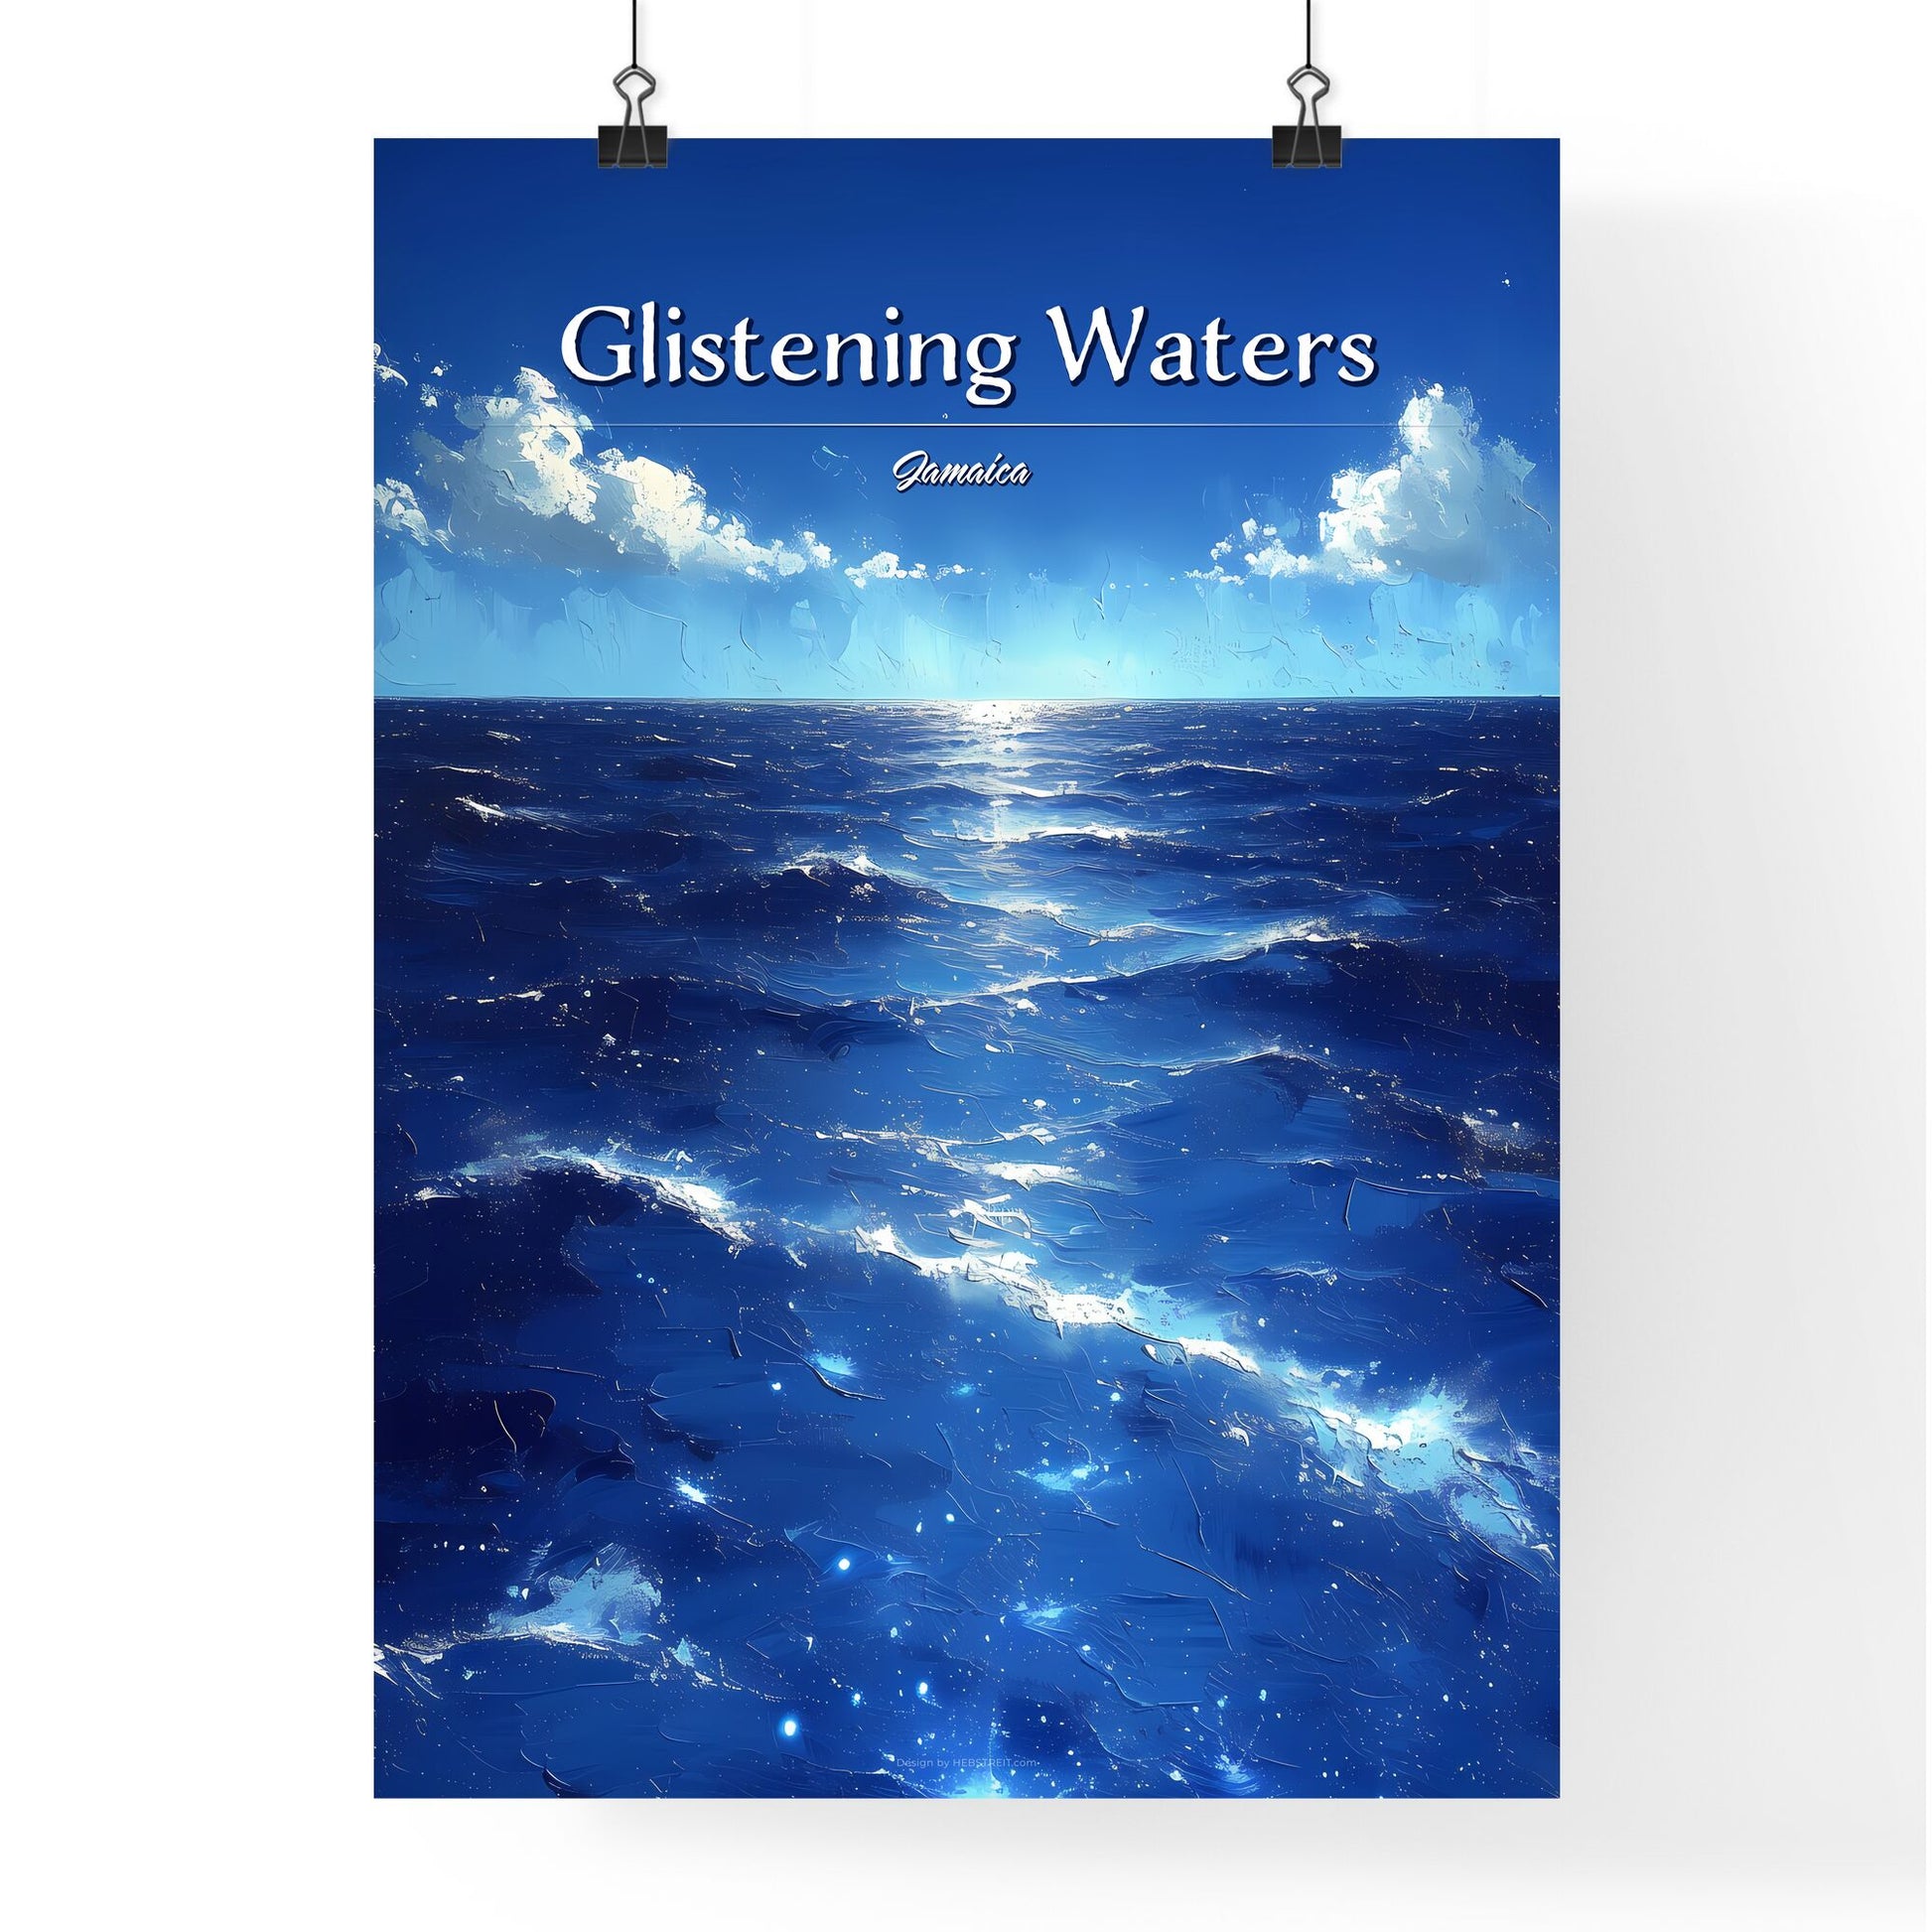 Glistening Waters Luminous Lagoon, Jamaica - Art print of a blue ocean with white clouds Default Title